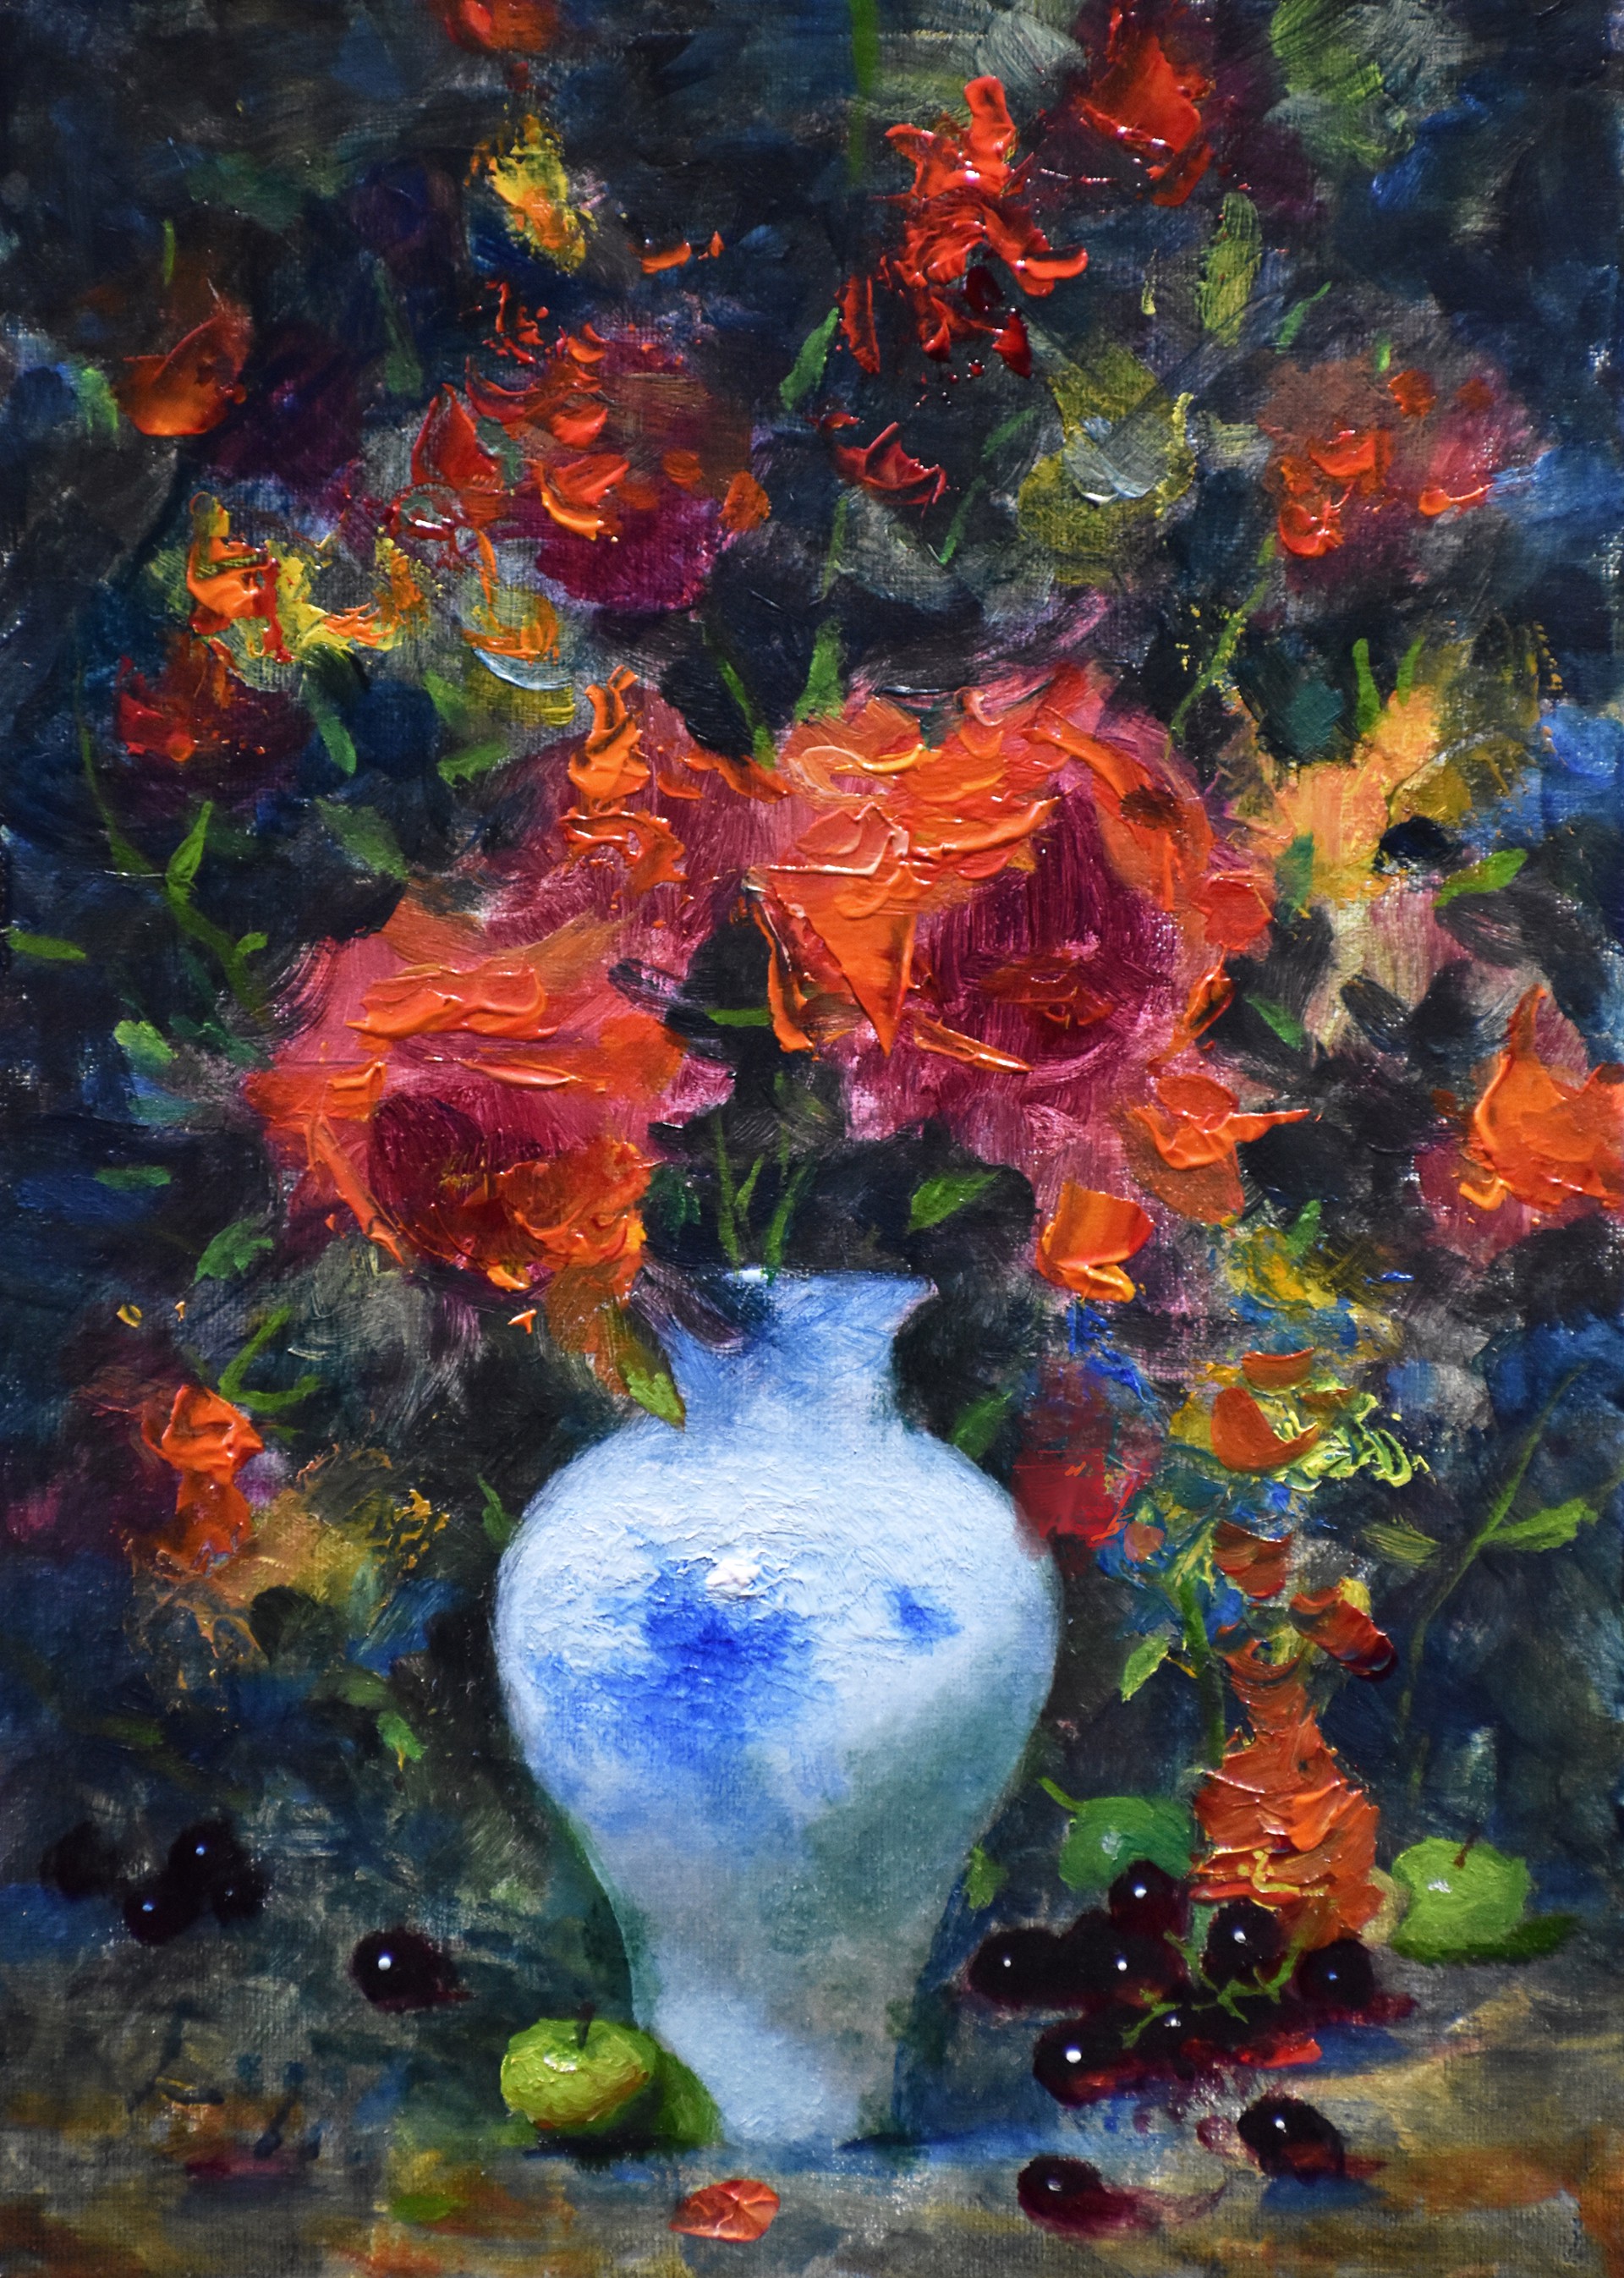 Red Adoration by Jeff Legg